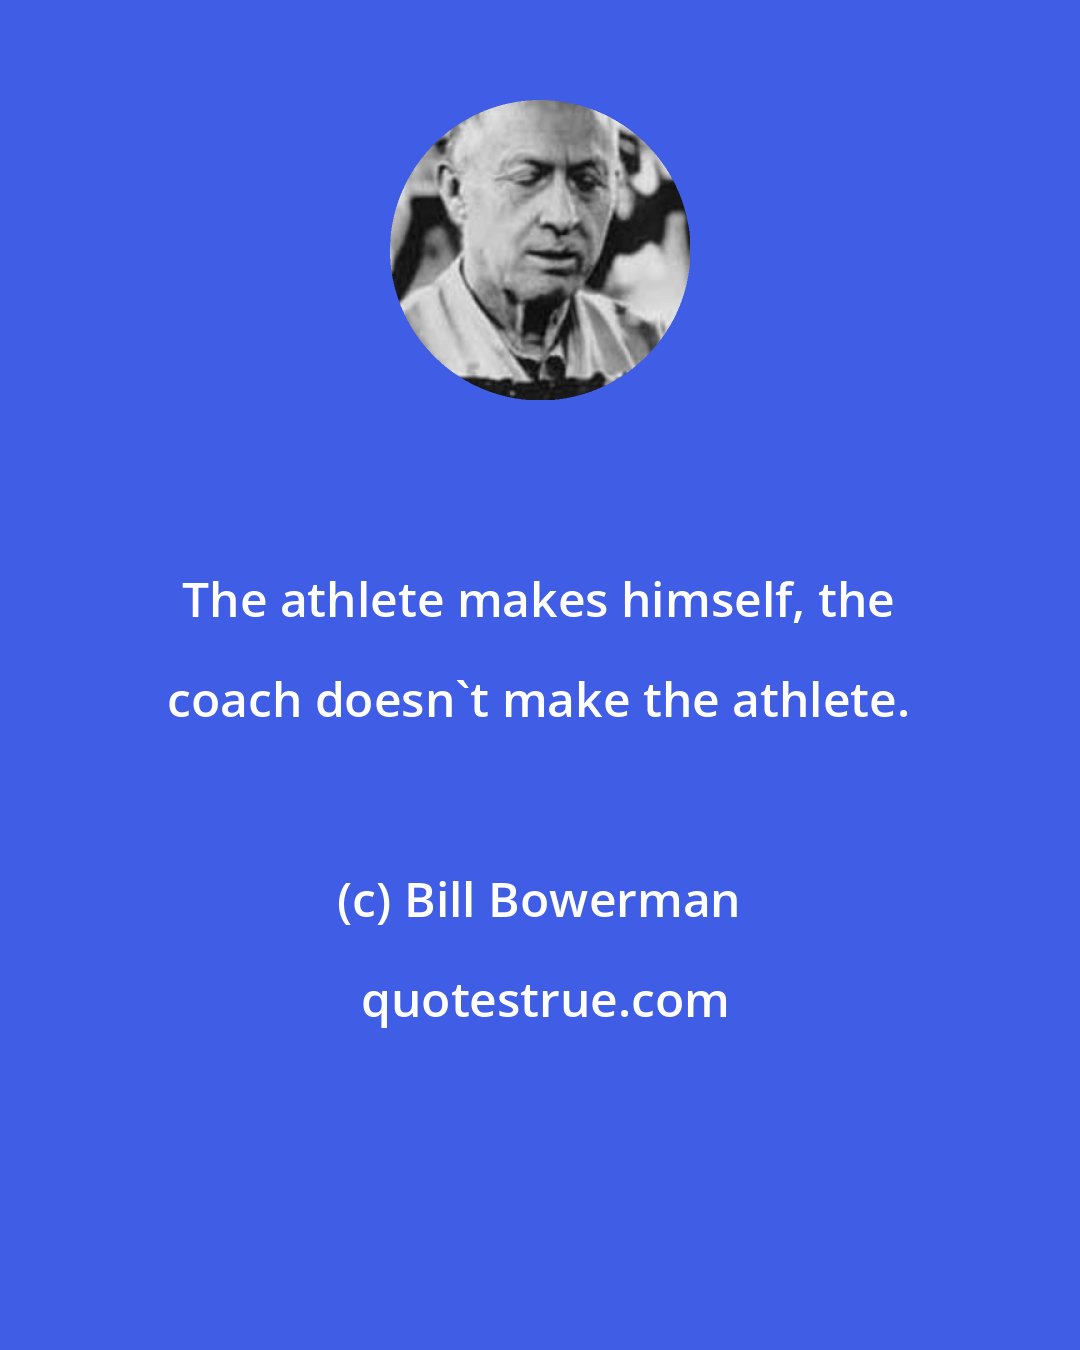 Bill Bowerman: The athlete makes himself, the coach doesn't make the athlete.